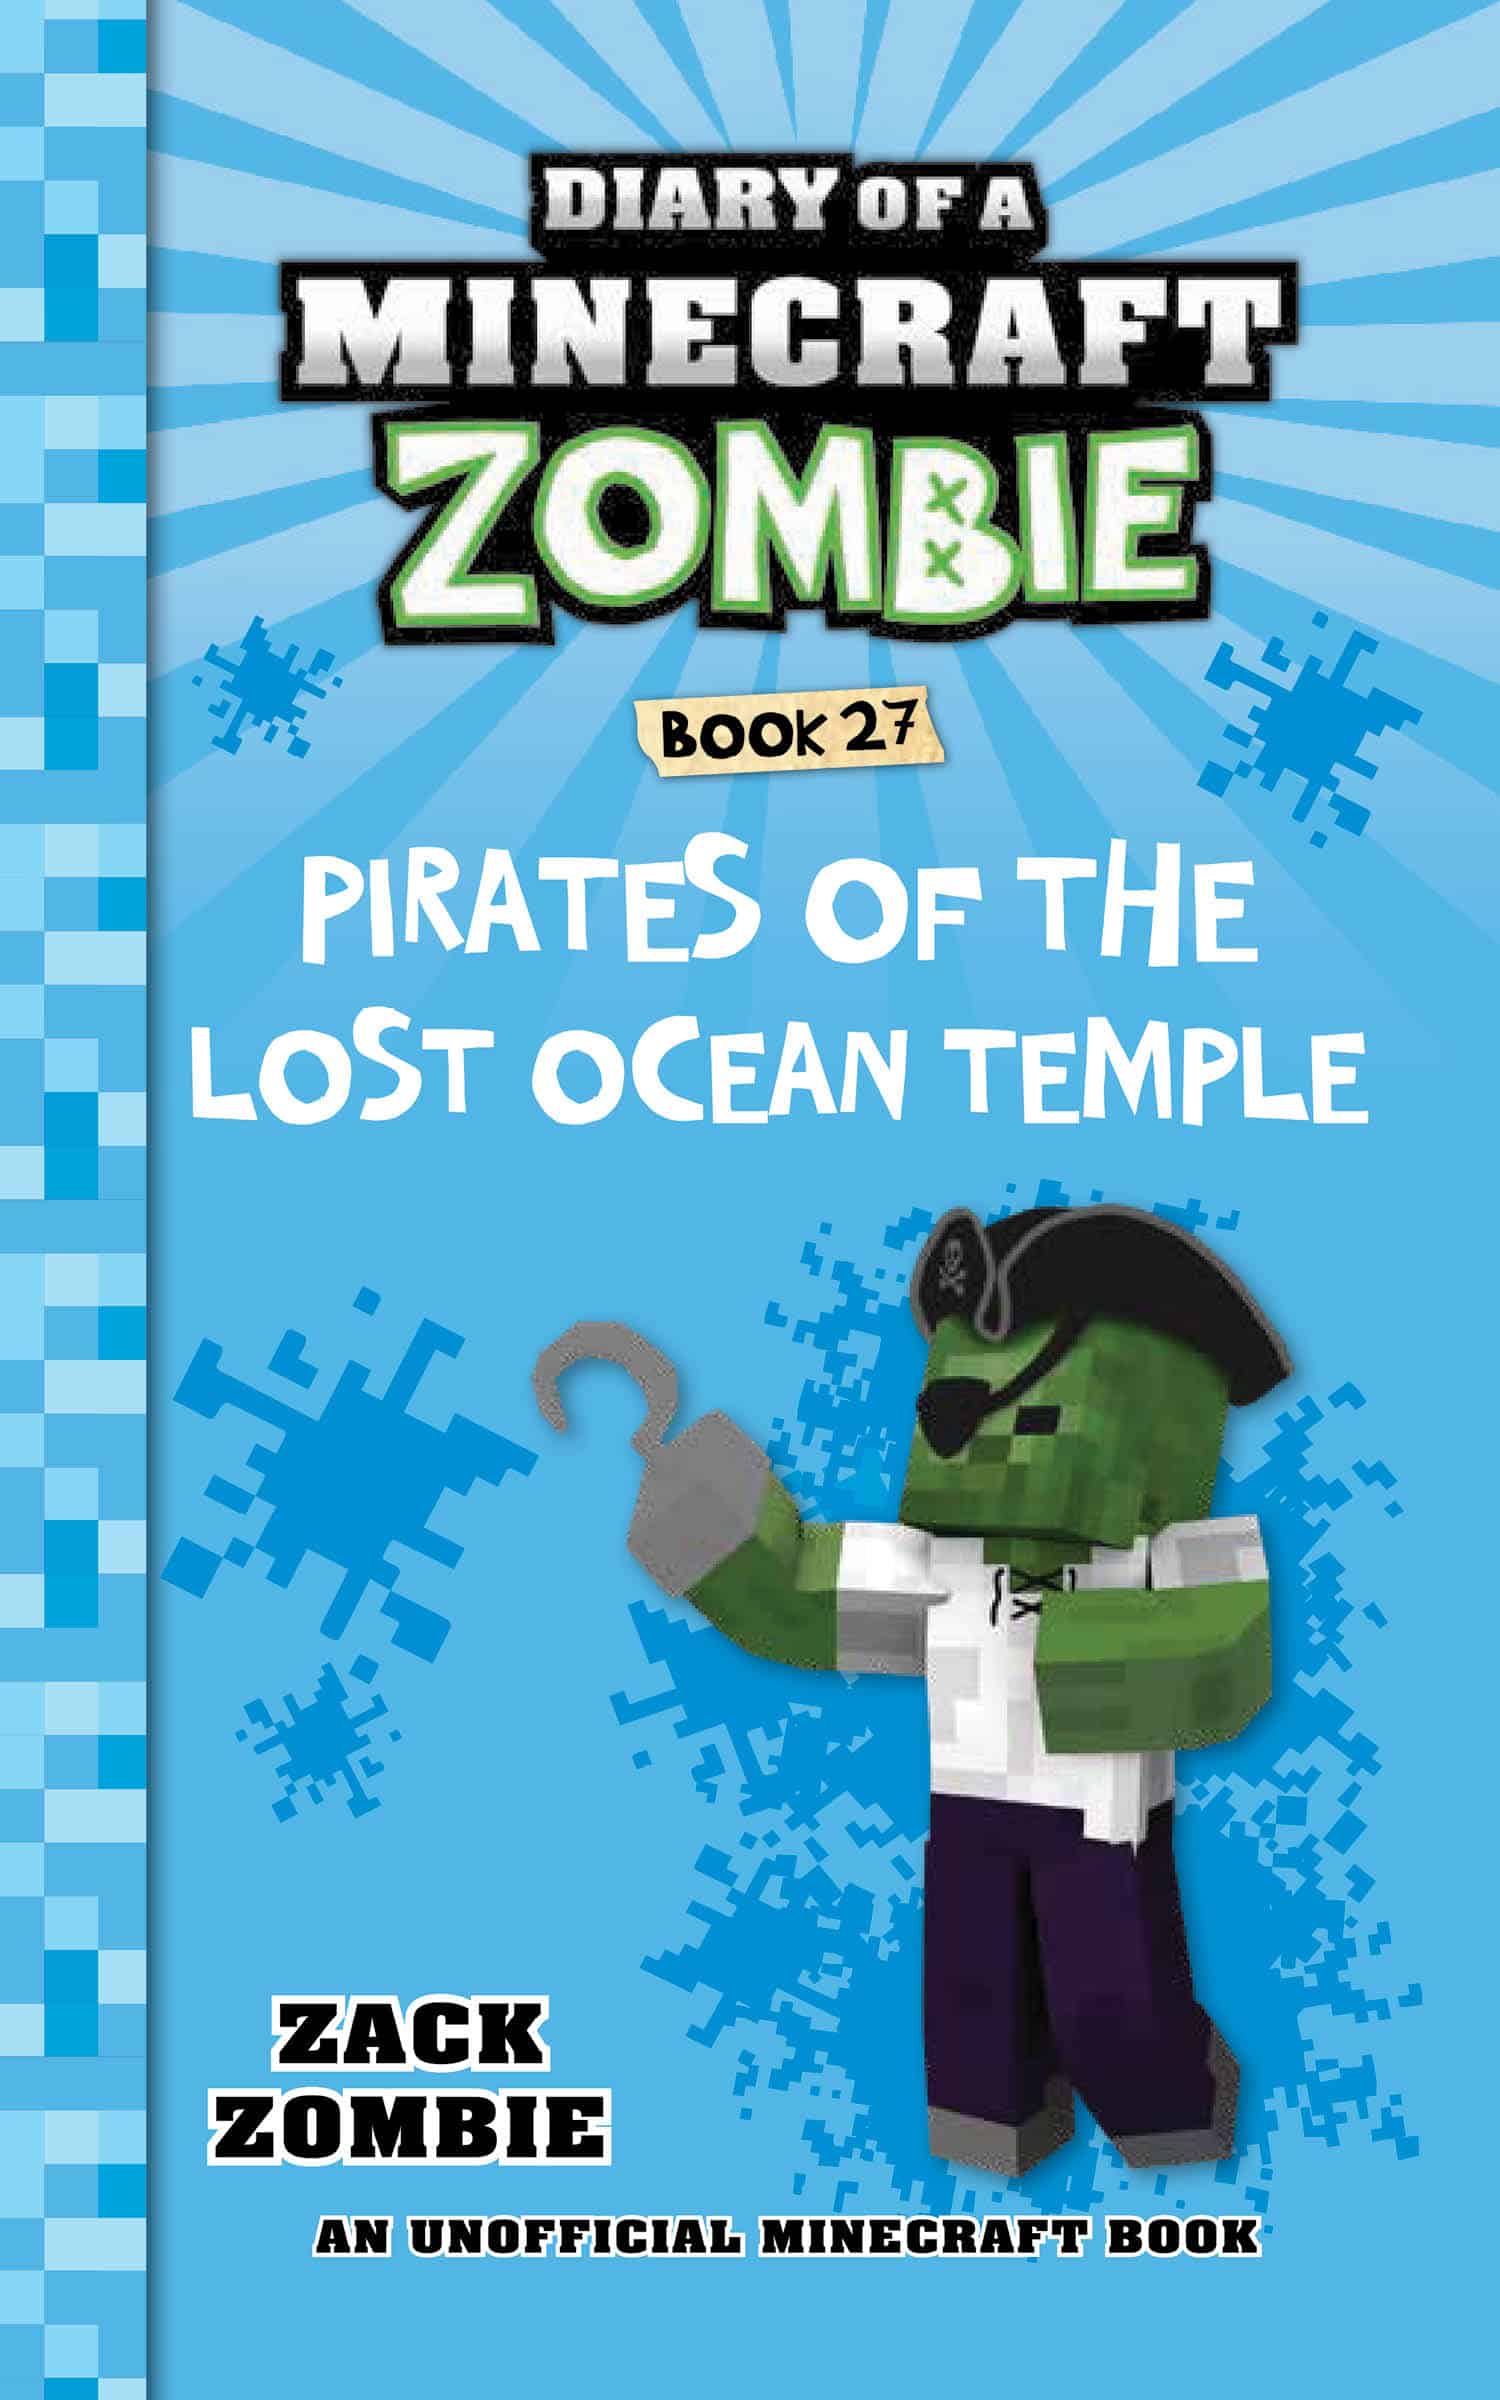 Book 27 diary of a Minecraft zombie 